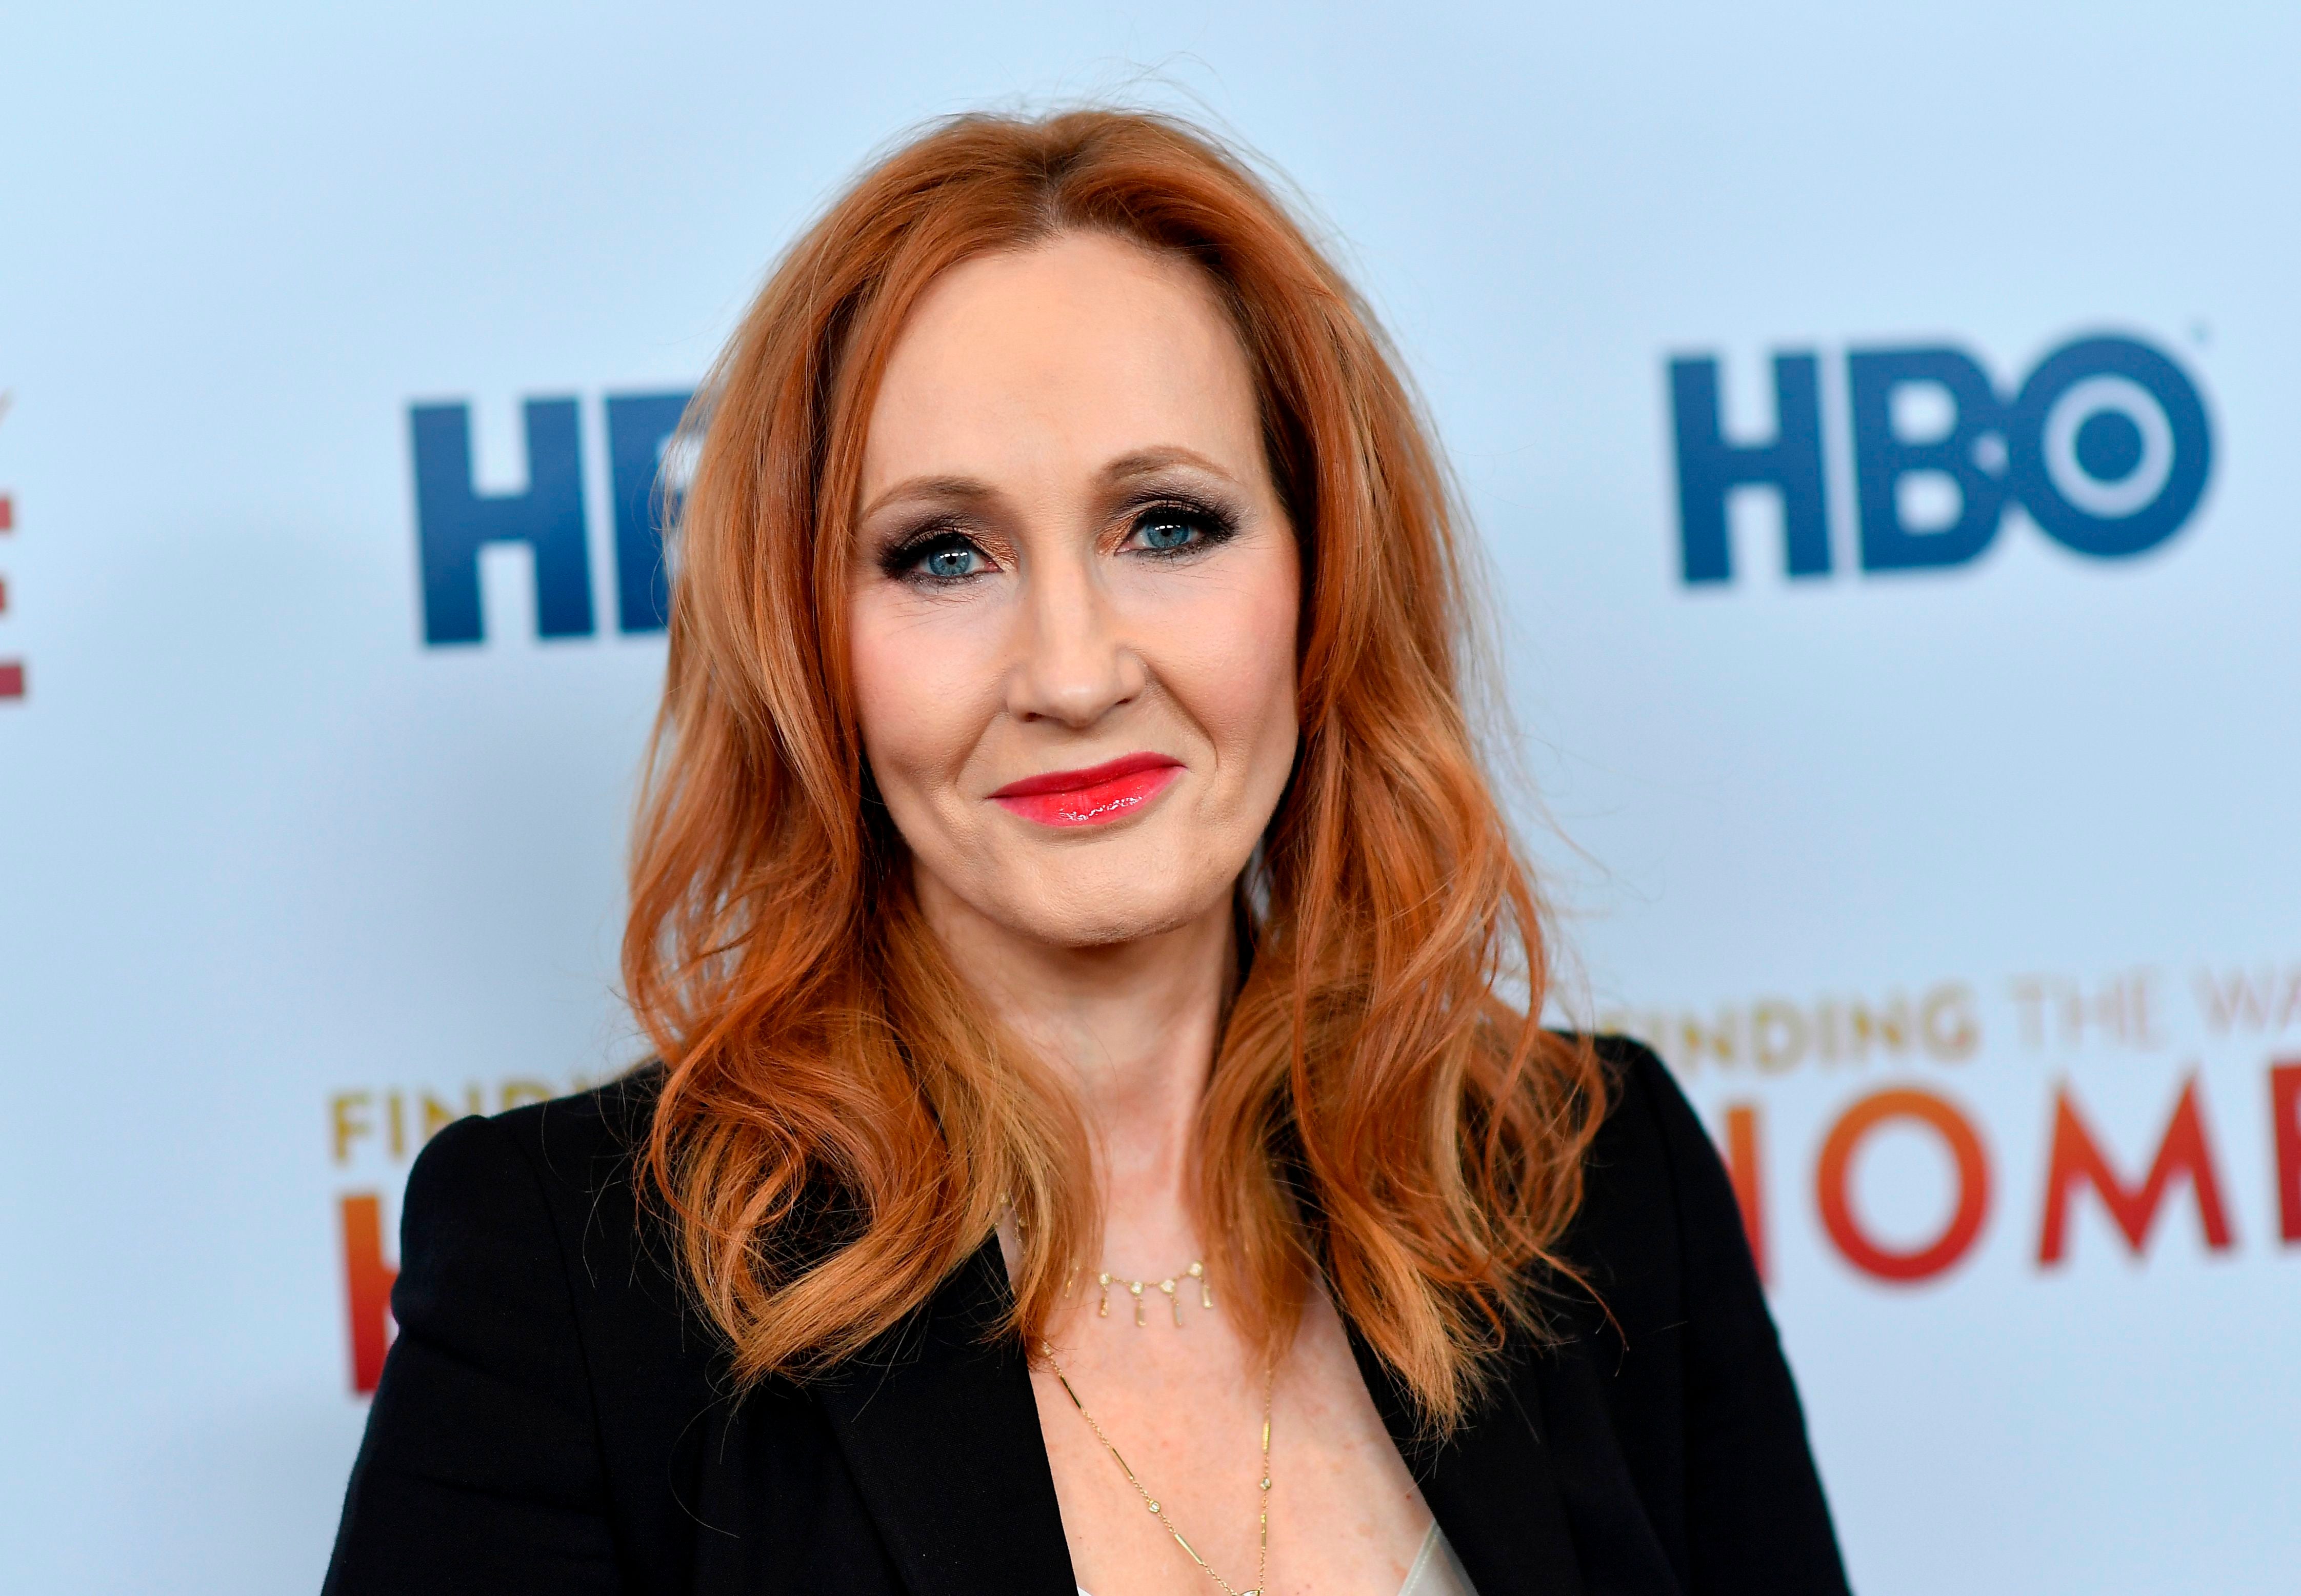 JK Rowling attends a premiere on 11 December 2019 in New York City